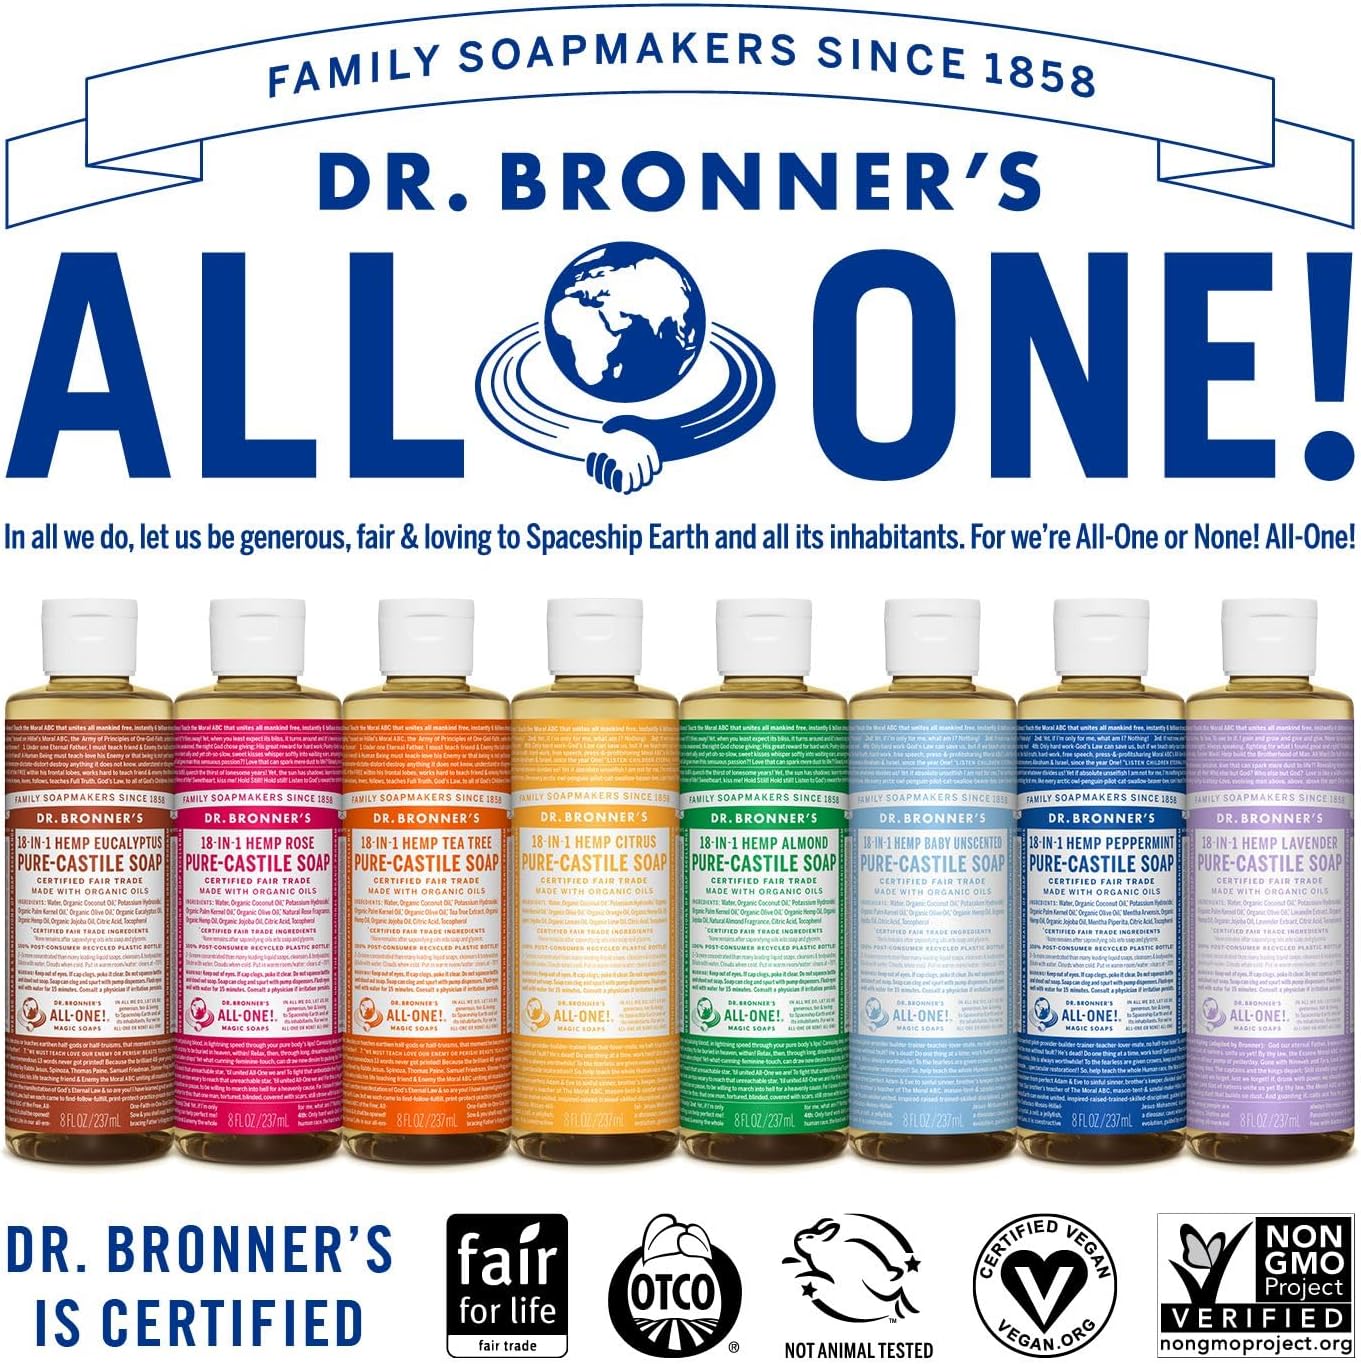 Dr. Bronner's - Pure-Castile Liquid Soap (Lavender, 8 ounce) - Made with Organic Oils, 18-in-1 Uses: Face, Body, Hair, Laundry, Pets and Dishes, Concentrated, Vegan, Non-GMO : Camping Soaps And Shampoos : Beauty & Personal Care